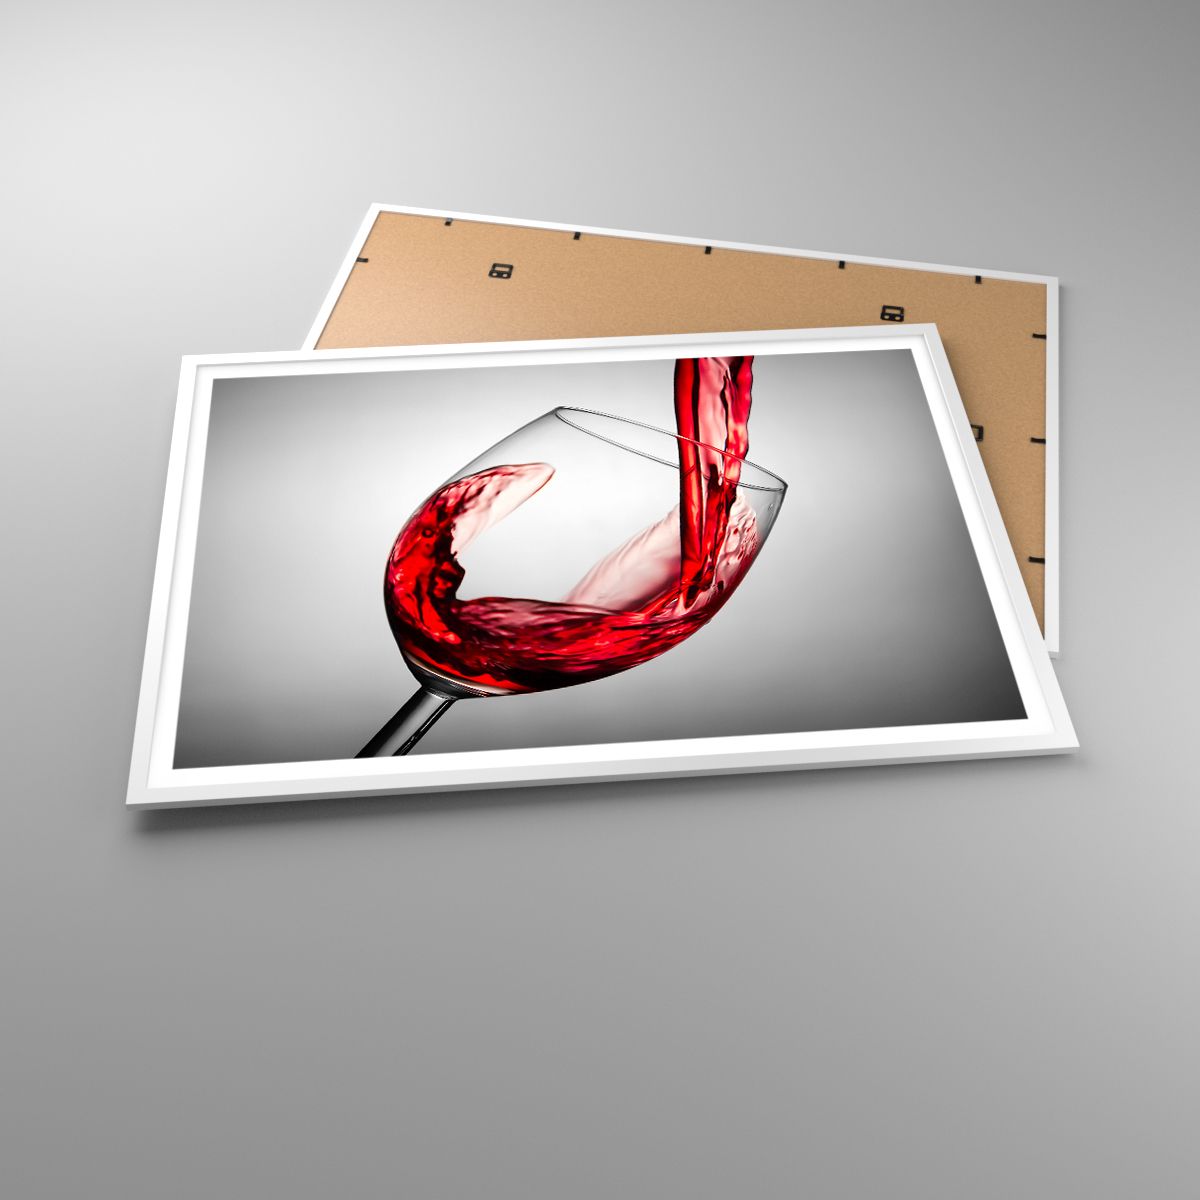 Poster Weinglas, Poster Rotwein, Poster Gastronomie, Poster Spiel, Poster Toast